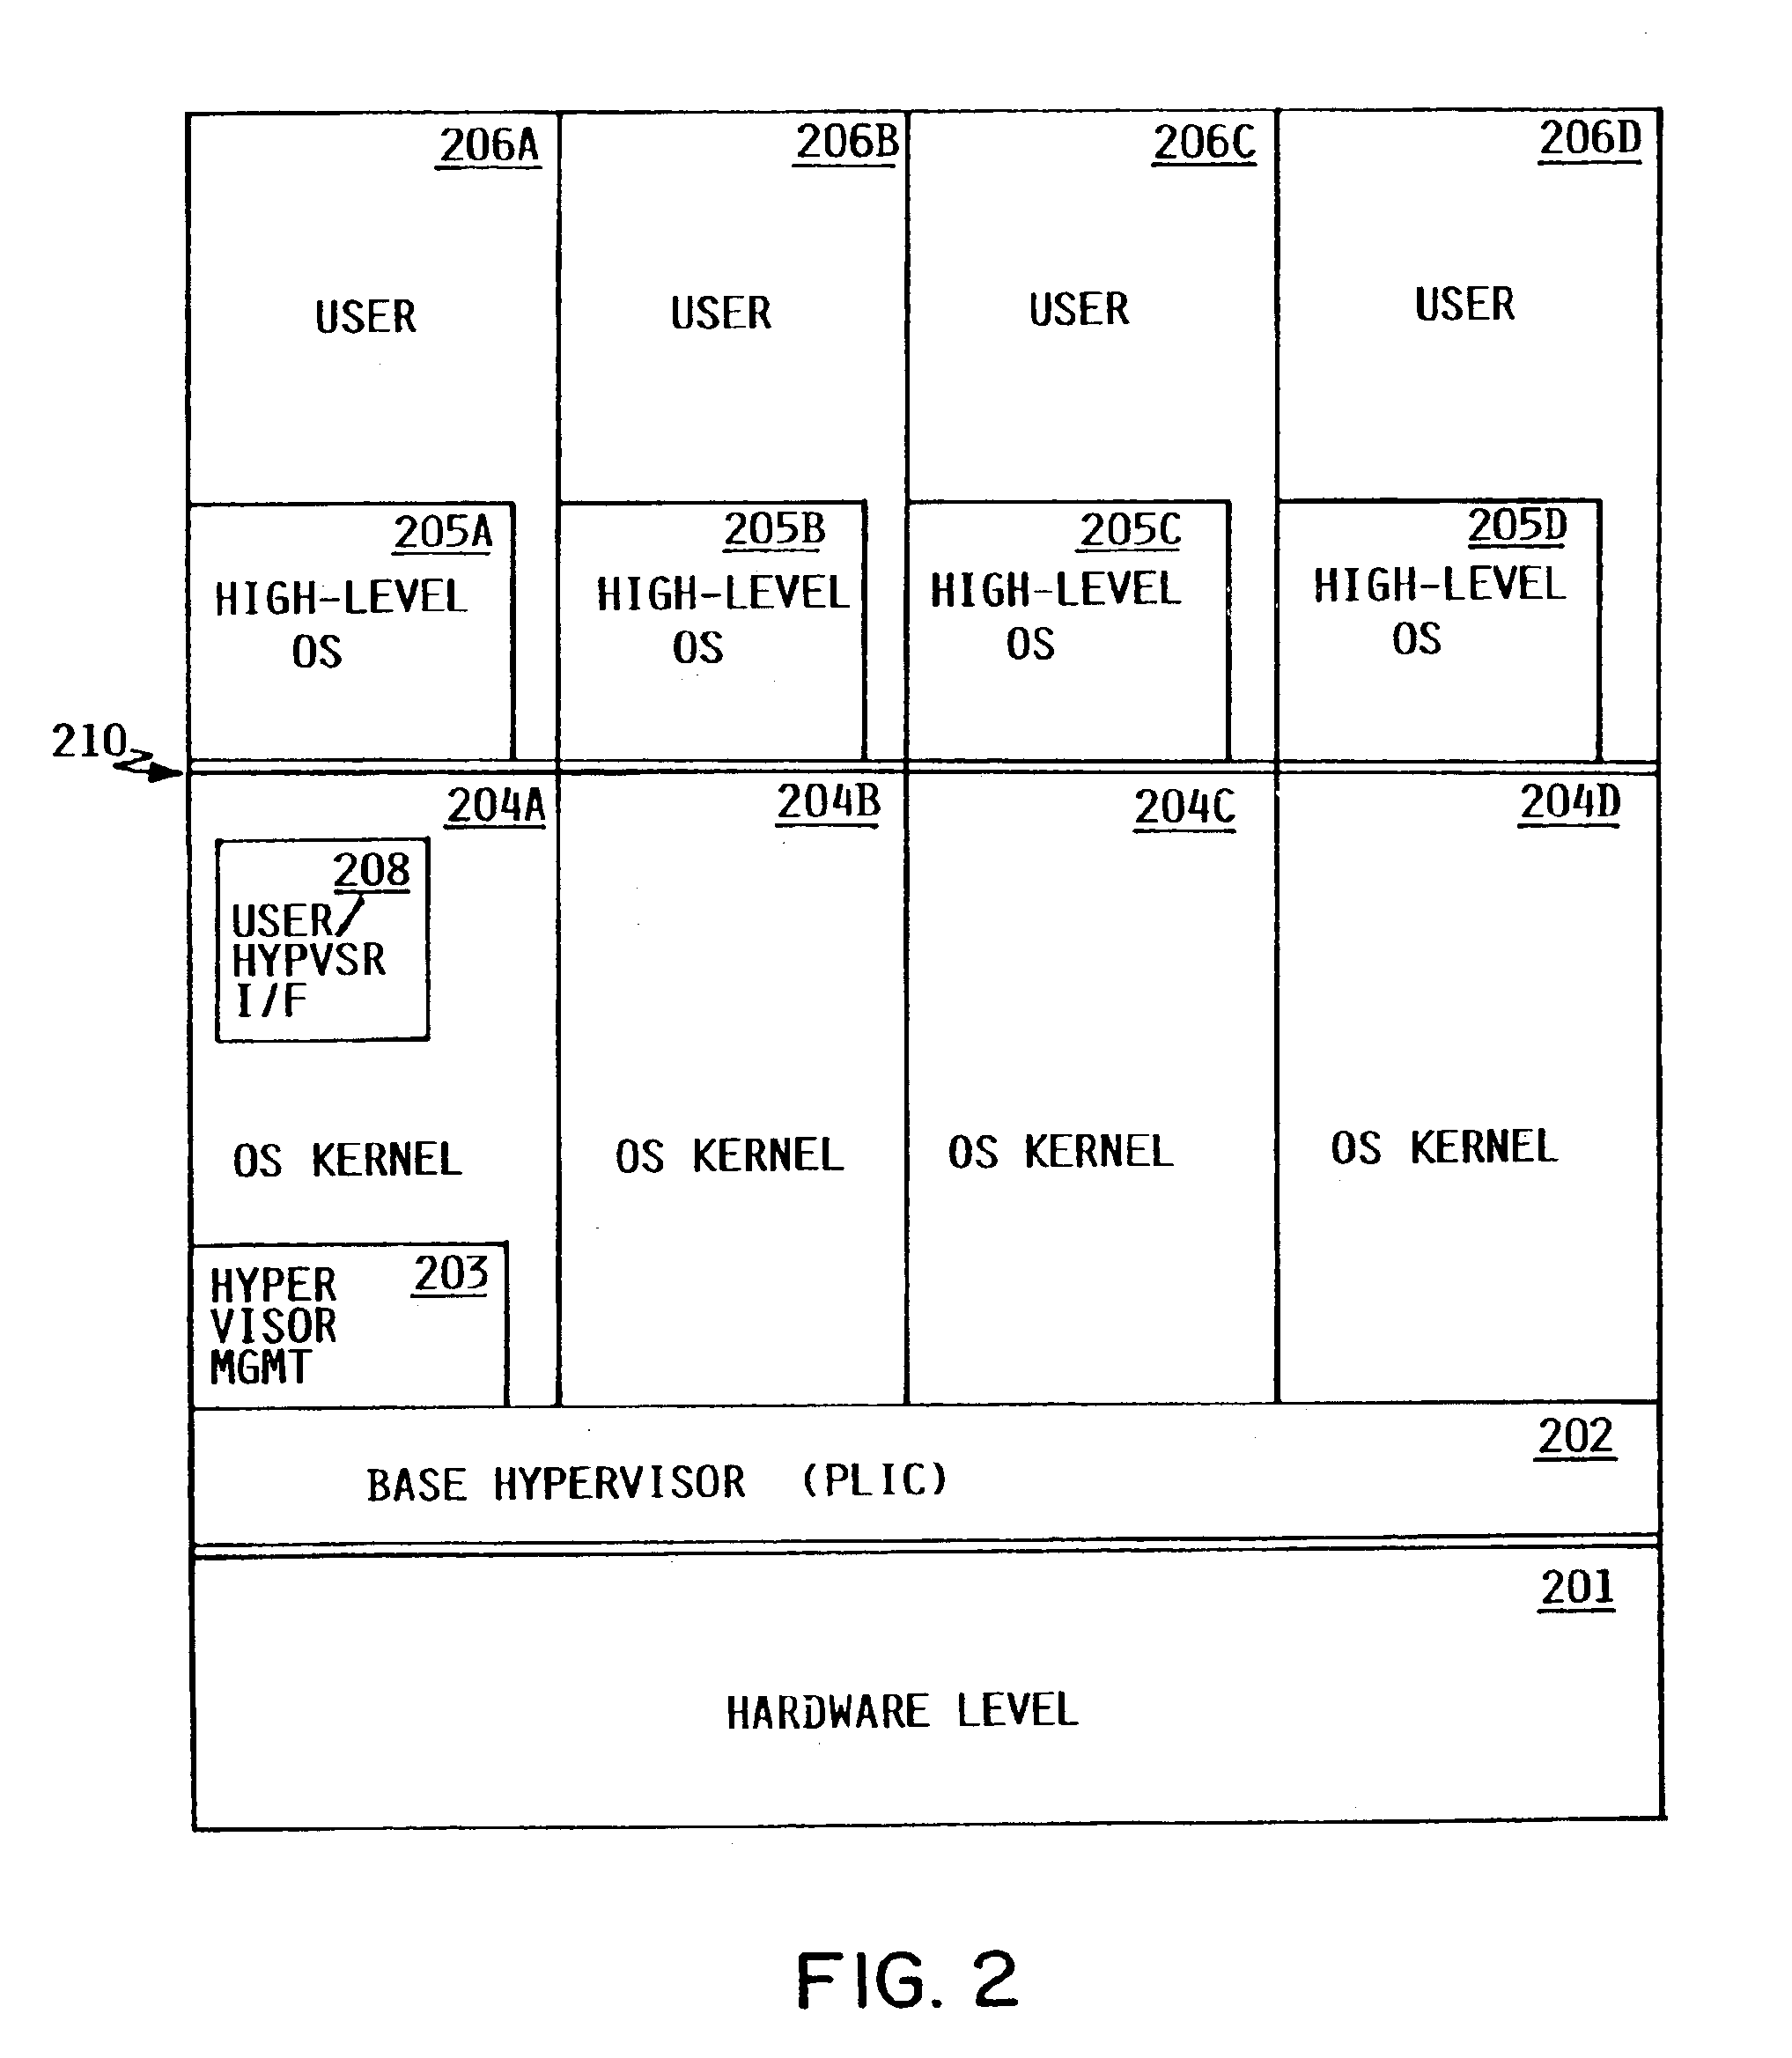 Method and apparatus for allocating processor resources in a logically partitioned computer system